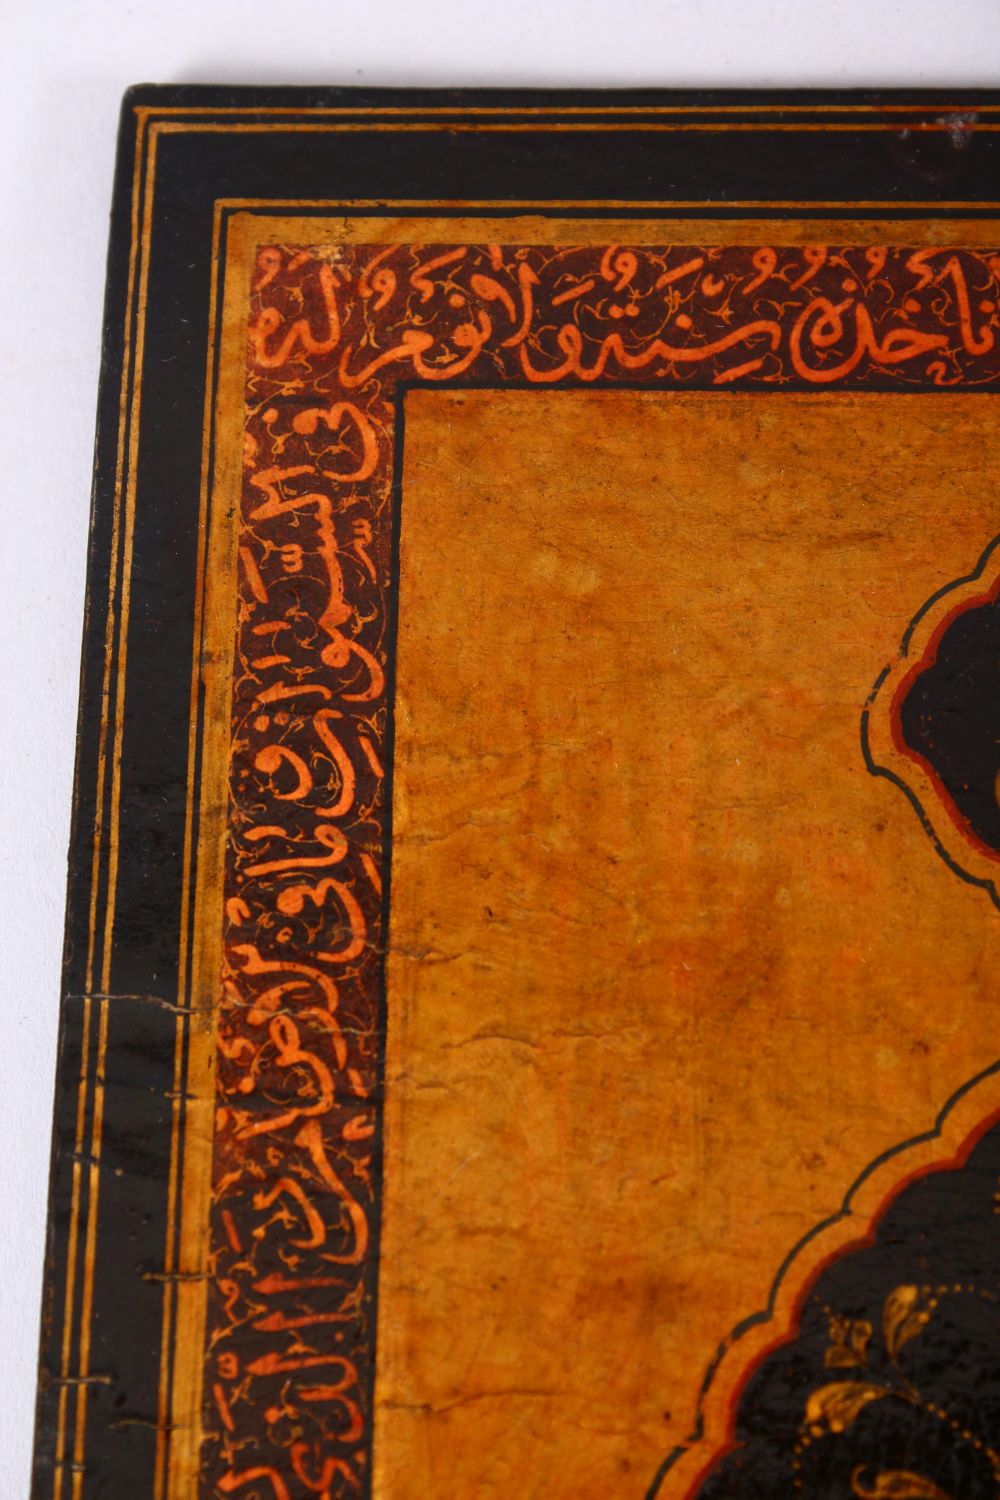 A GOOD 19TH CENTURY PERSIAN LACQUER BOOK COVERS, painted with bands of calligraphy and floral - Image 3 of 5